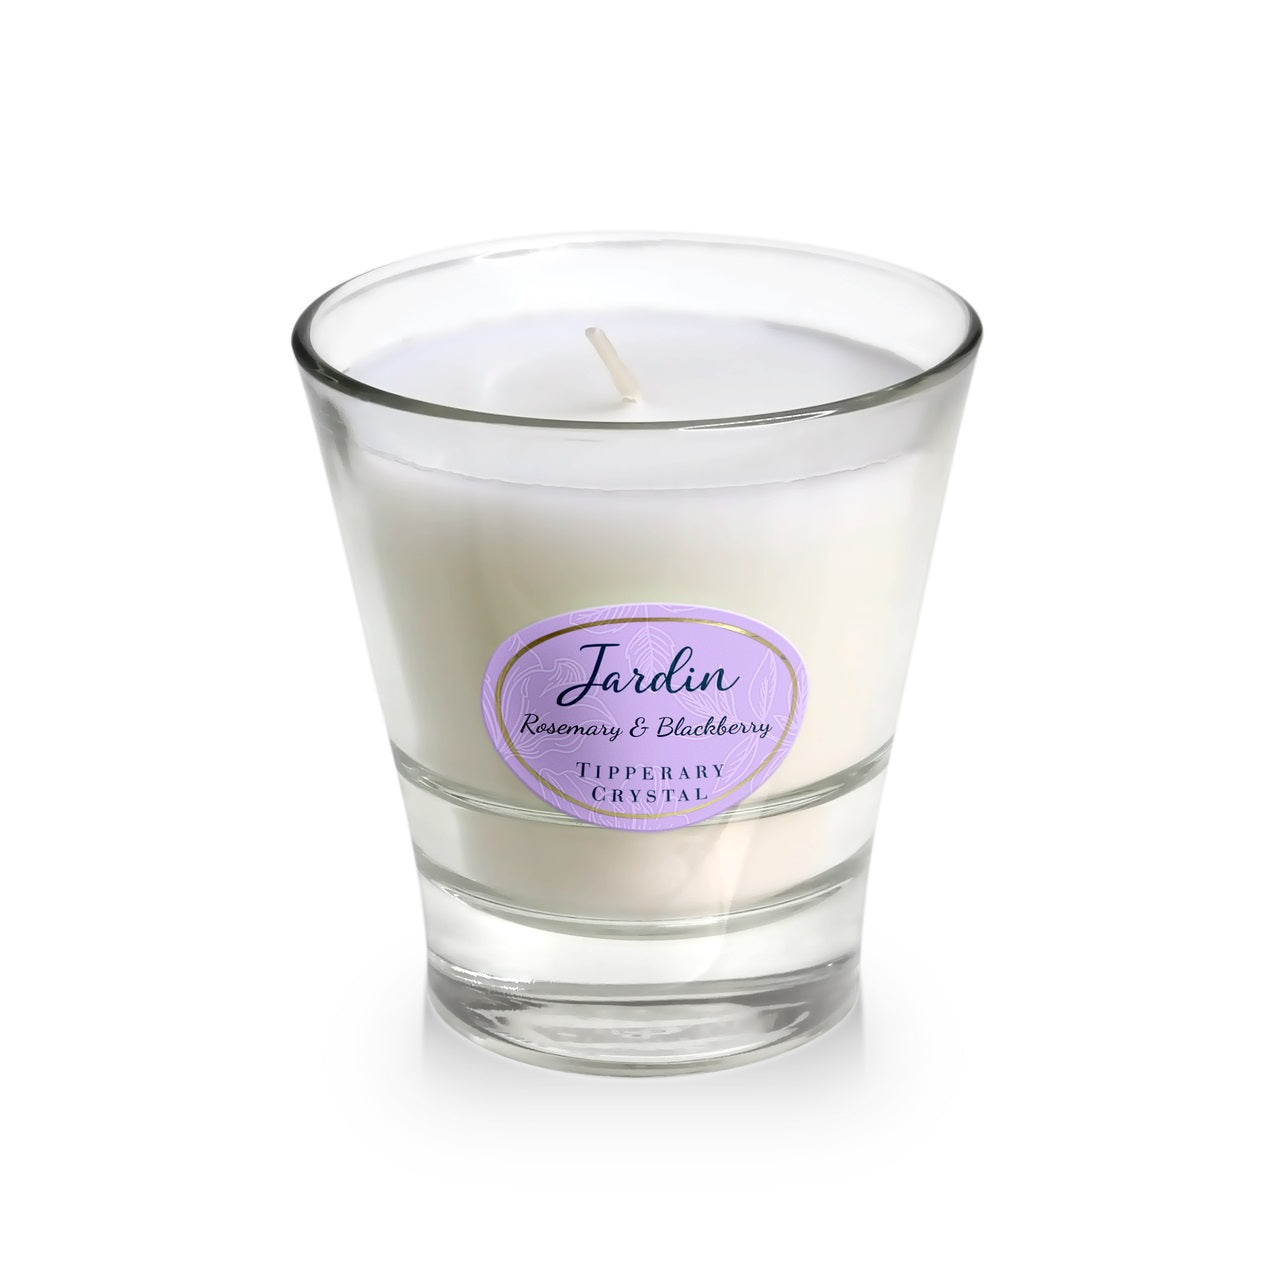 Tipperary Crystal Rosemary & Blackberry - Jardin Collection Candle